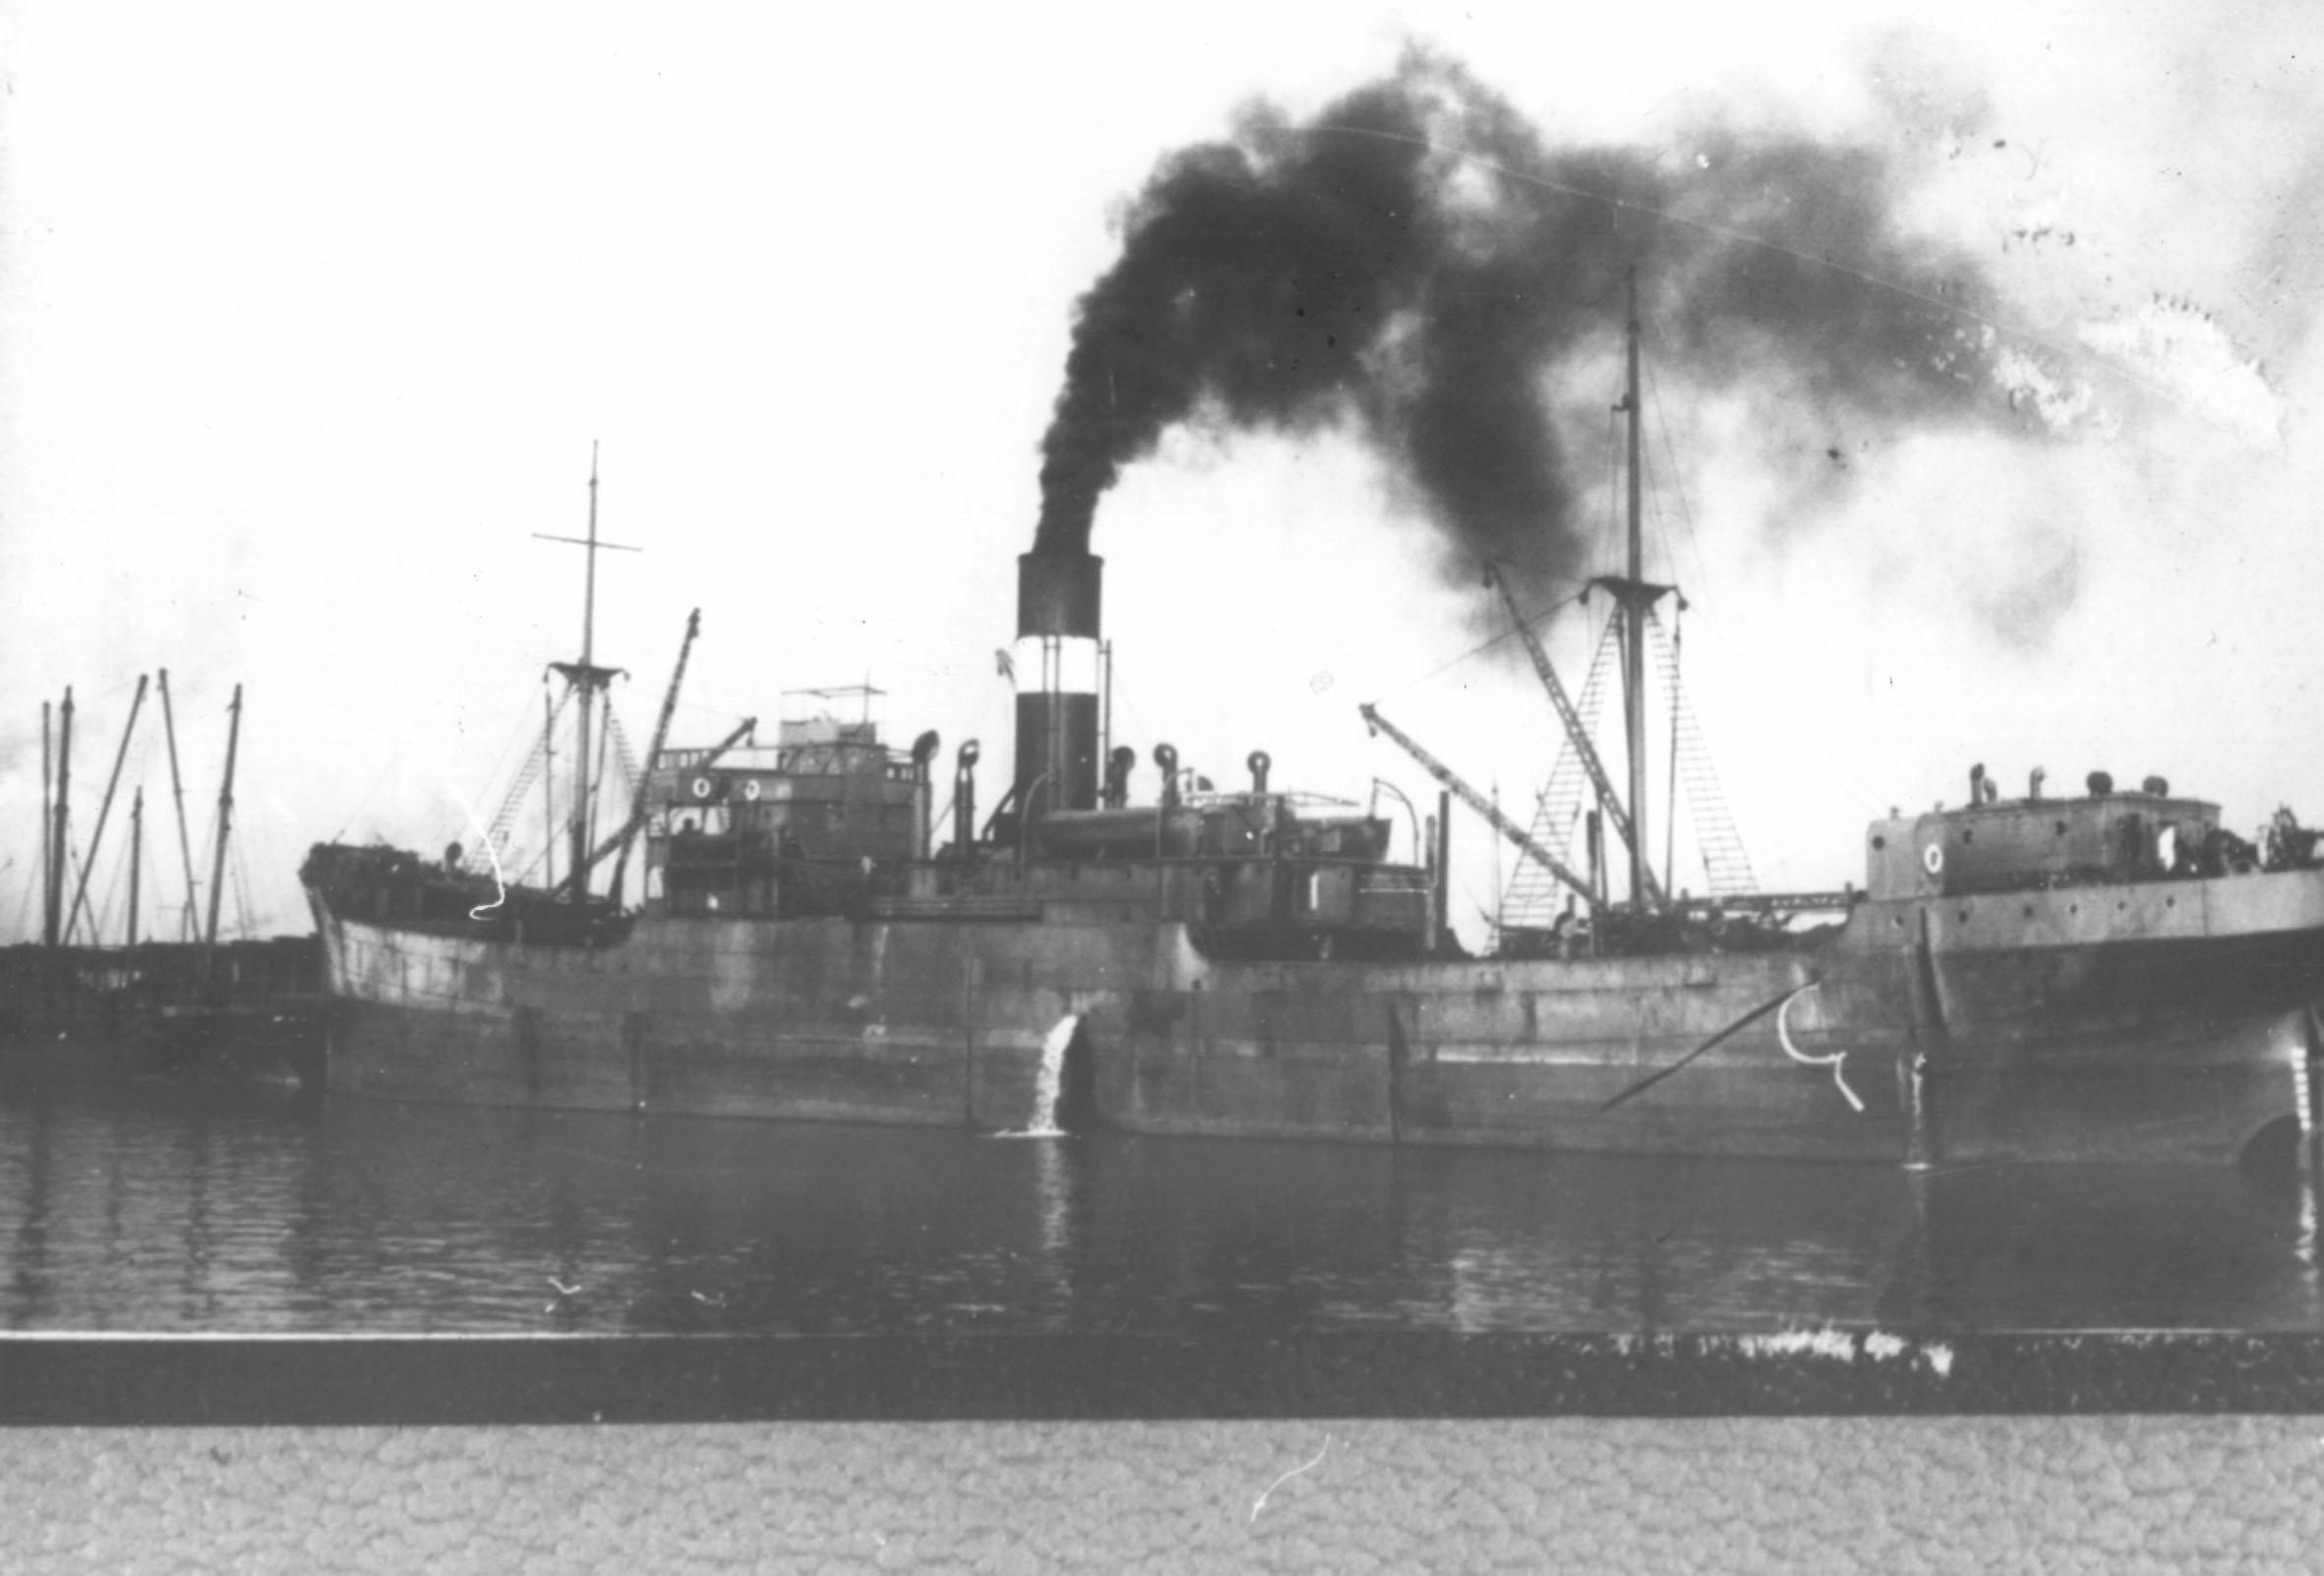 General Cargo vessel, S.S. "Dumosa", built in 1920 by Commonwealth Shipbuilding and dockyard in Williamstown.  Employed in interstate Coal from 1920 until 1951.  Owned by James Patterson and C.G.L.  Sold to India.  
Official Number:  132472
Dimensions: 